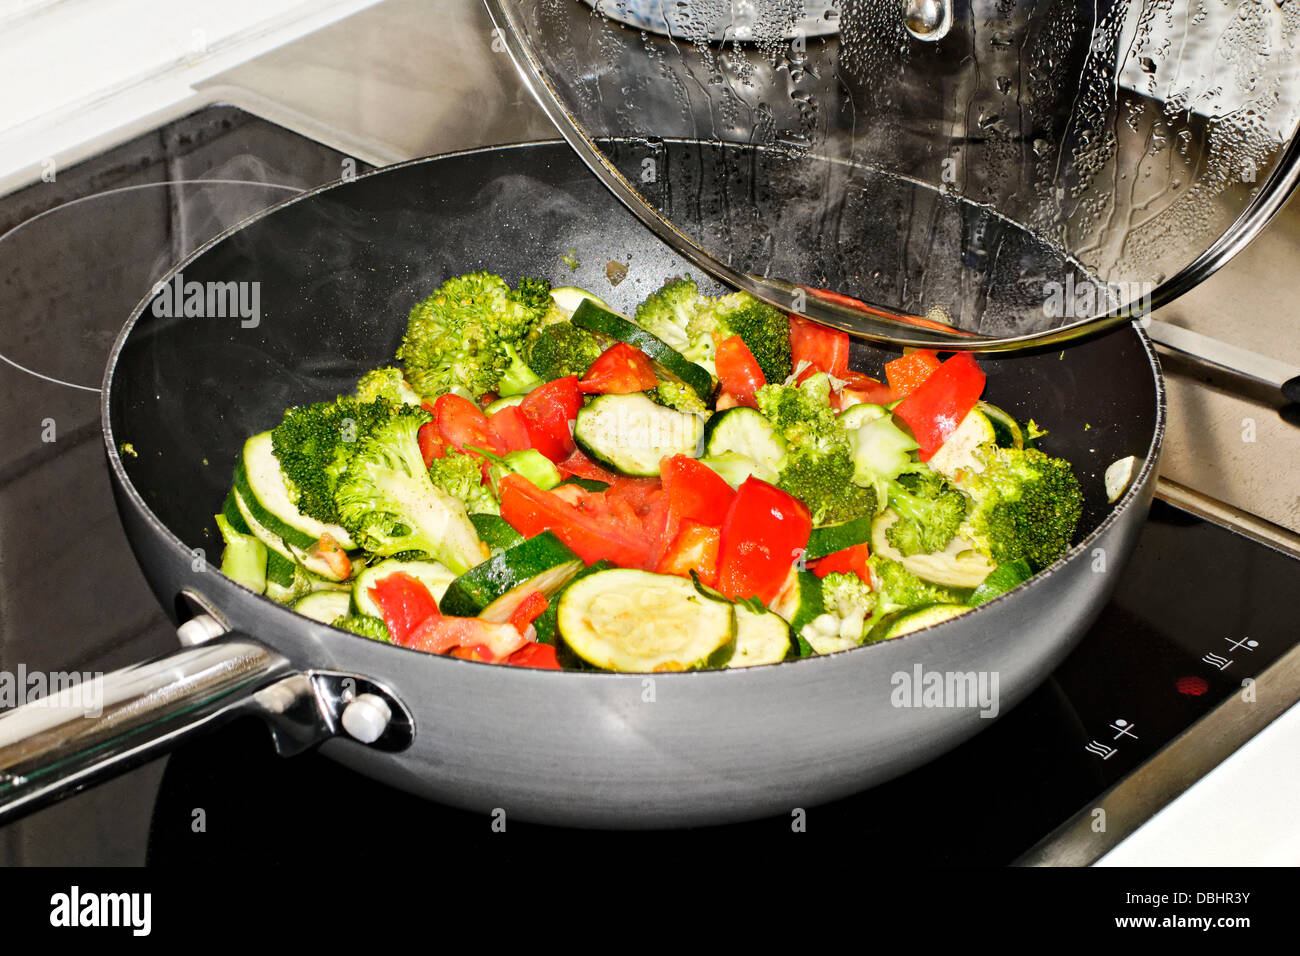 Freshly cooked vegetables in fry pan Stock Photo